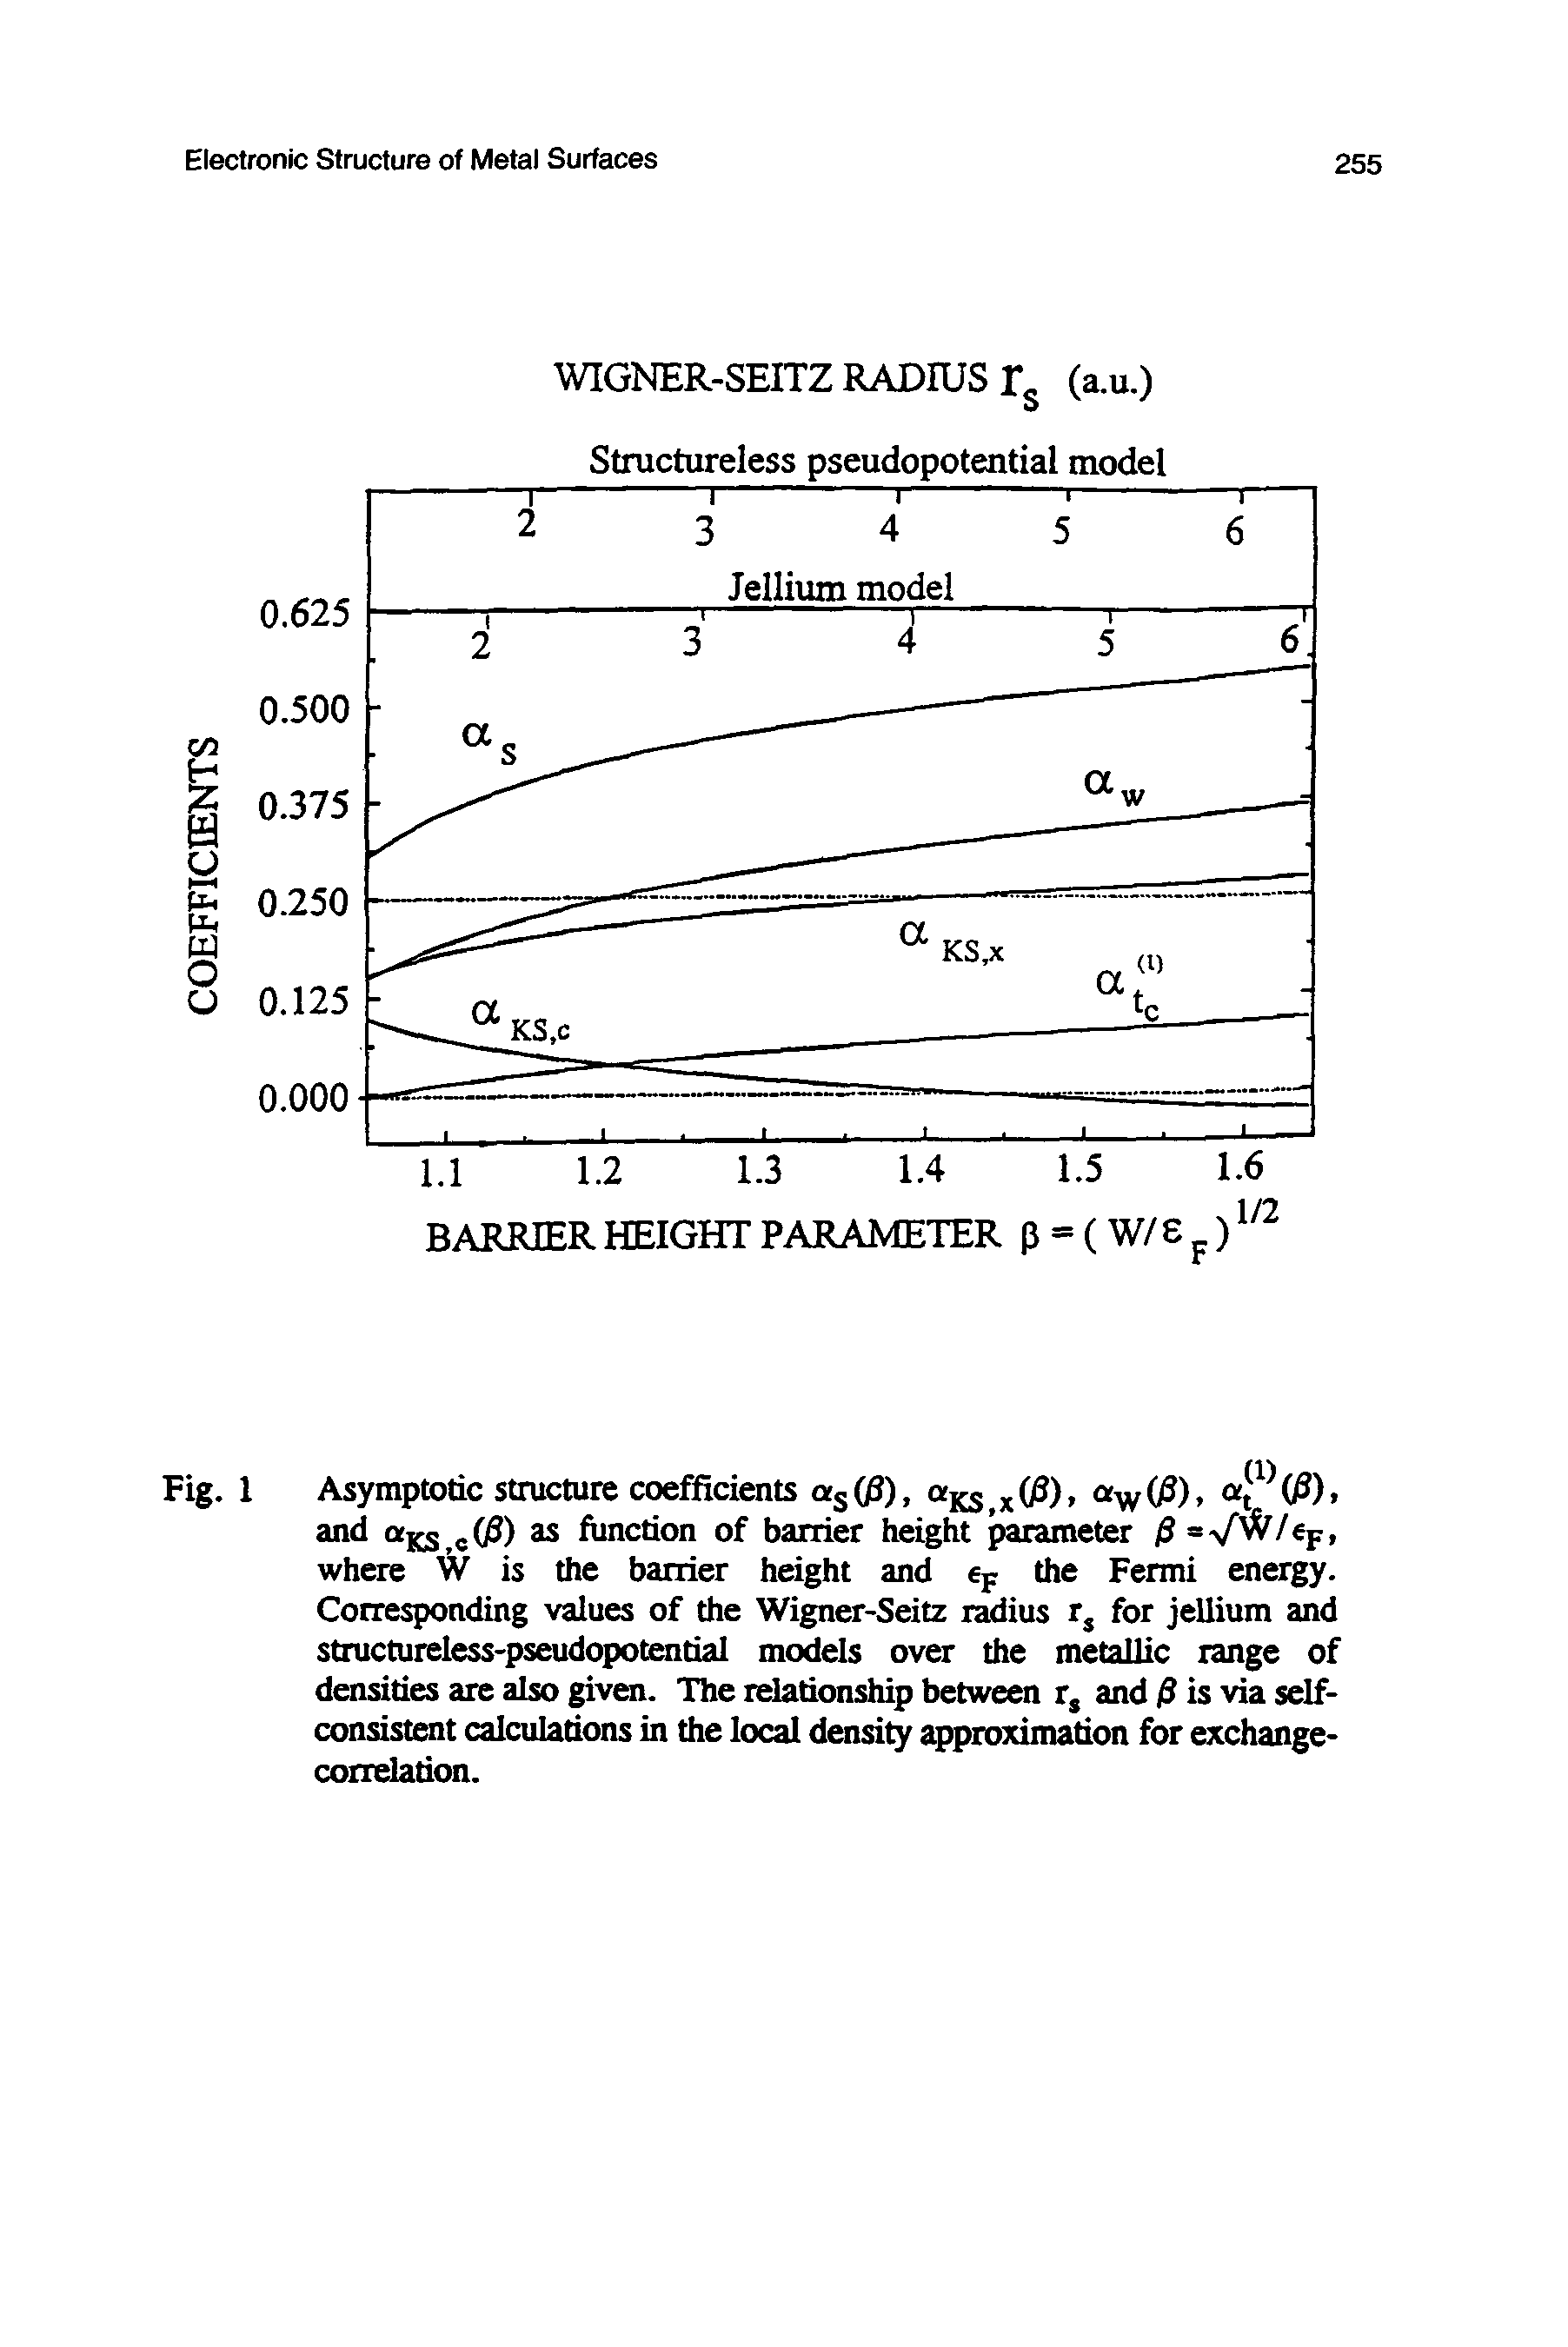 Fig. 1 Asymptotic structure coefficients as(j8), c ks,xG ) crw03), a CS), and aKS gOS) as fimction of barrier height parameter )S =VW/eF, where W is the barrier height and eF the Fermi energy. Corresponding values of the Wigner-Seitz radius rs for jellium and structureless-pseudopotential models over the metallic range of densities are also given. The relationship between rs and ff is via self-consistent calculations in the local density approximation for exchange-correlation.